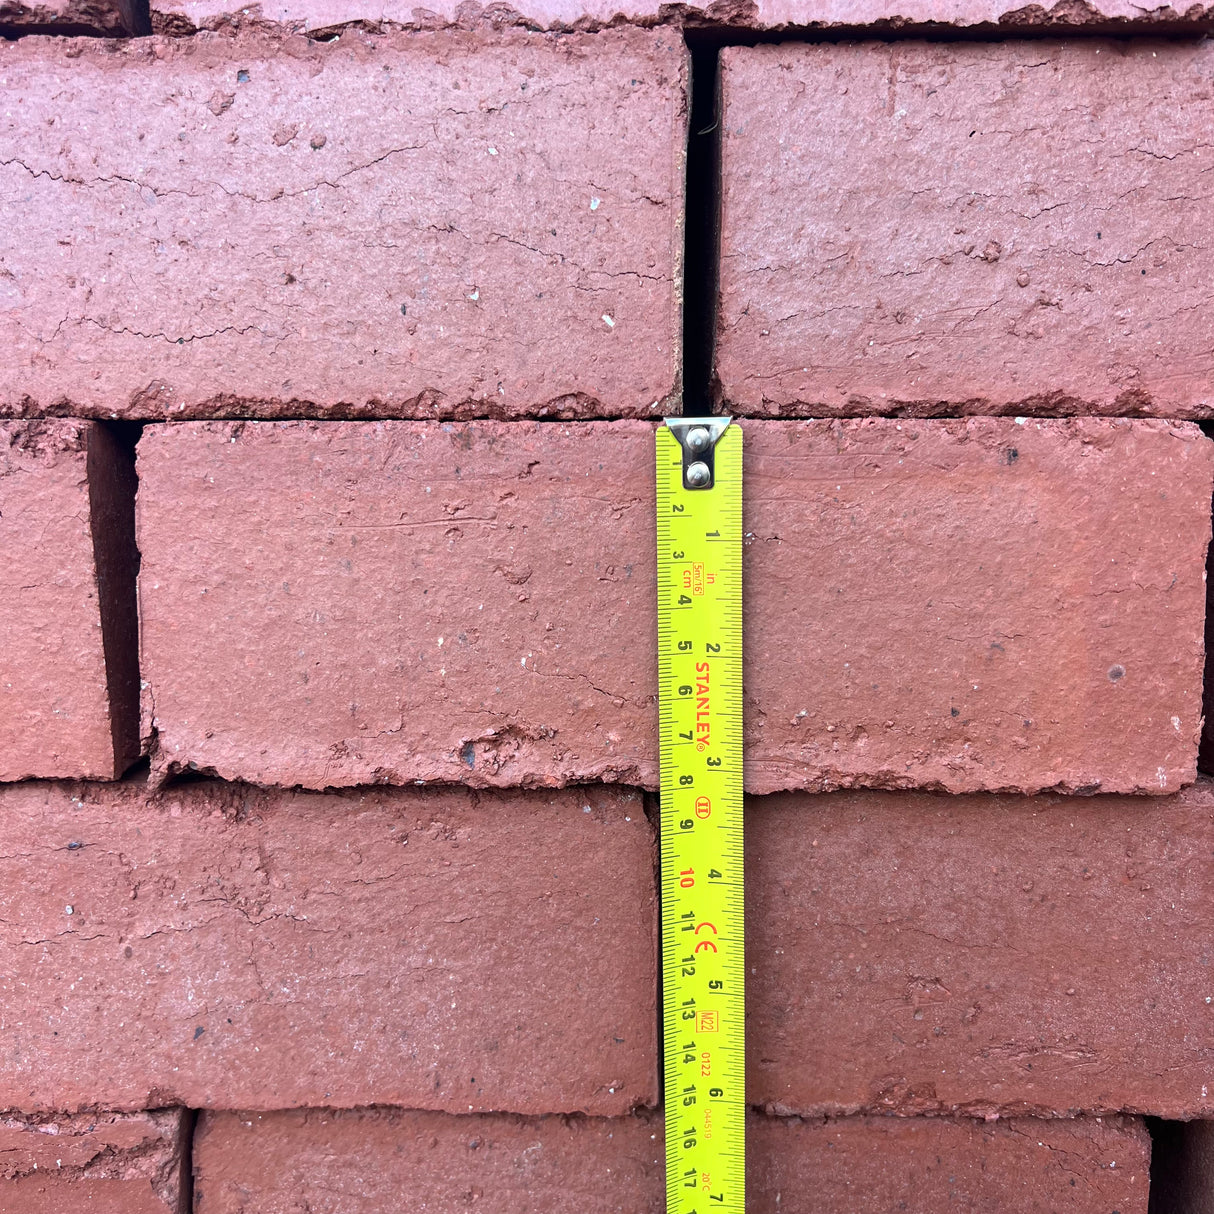 80mm Victorian Red Imperial Pressed Facing Brick - Reclaimed Brick Company